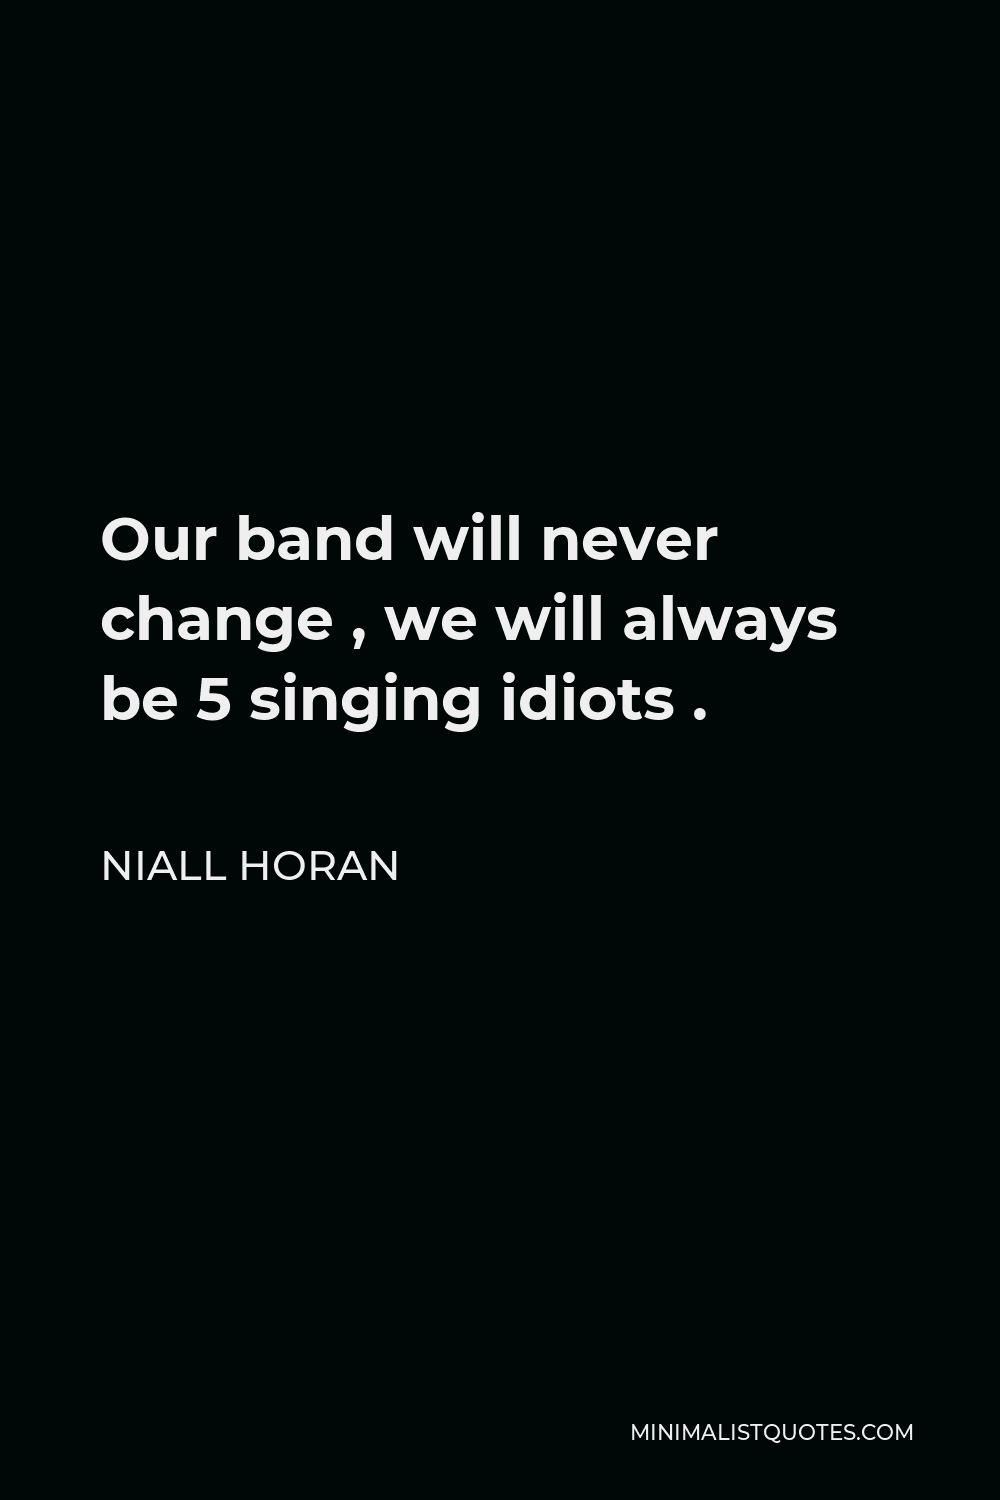 Niall Horan Quote - Our band will never change , we will always be 5 singing idiots .